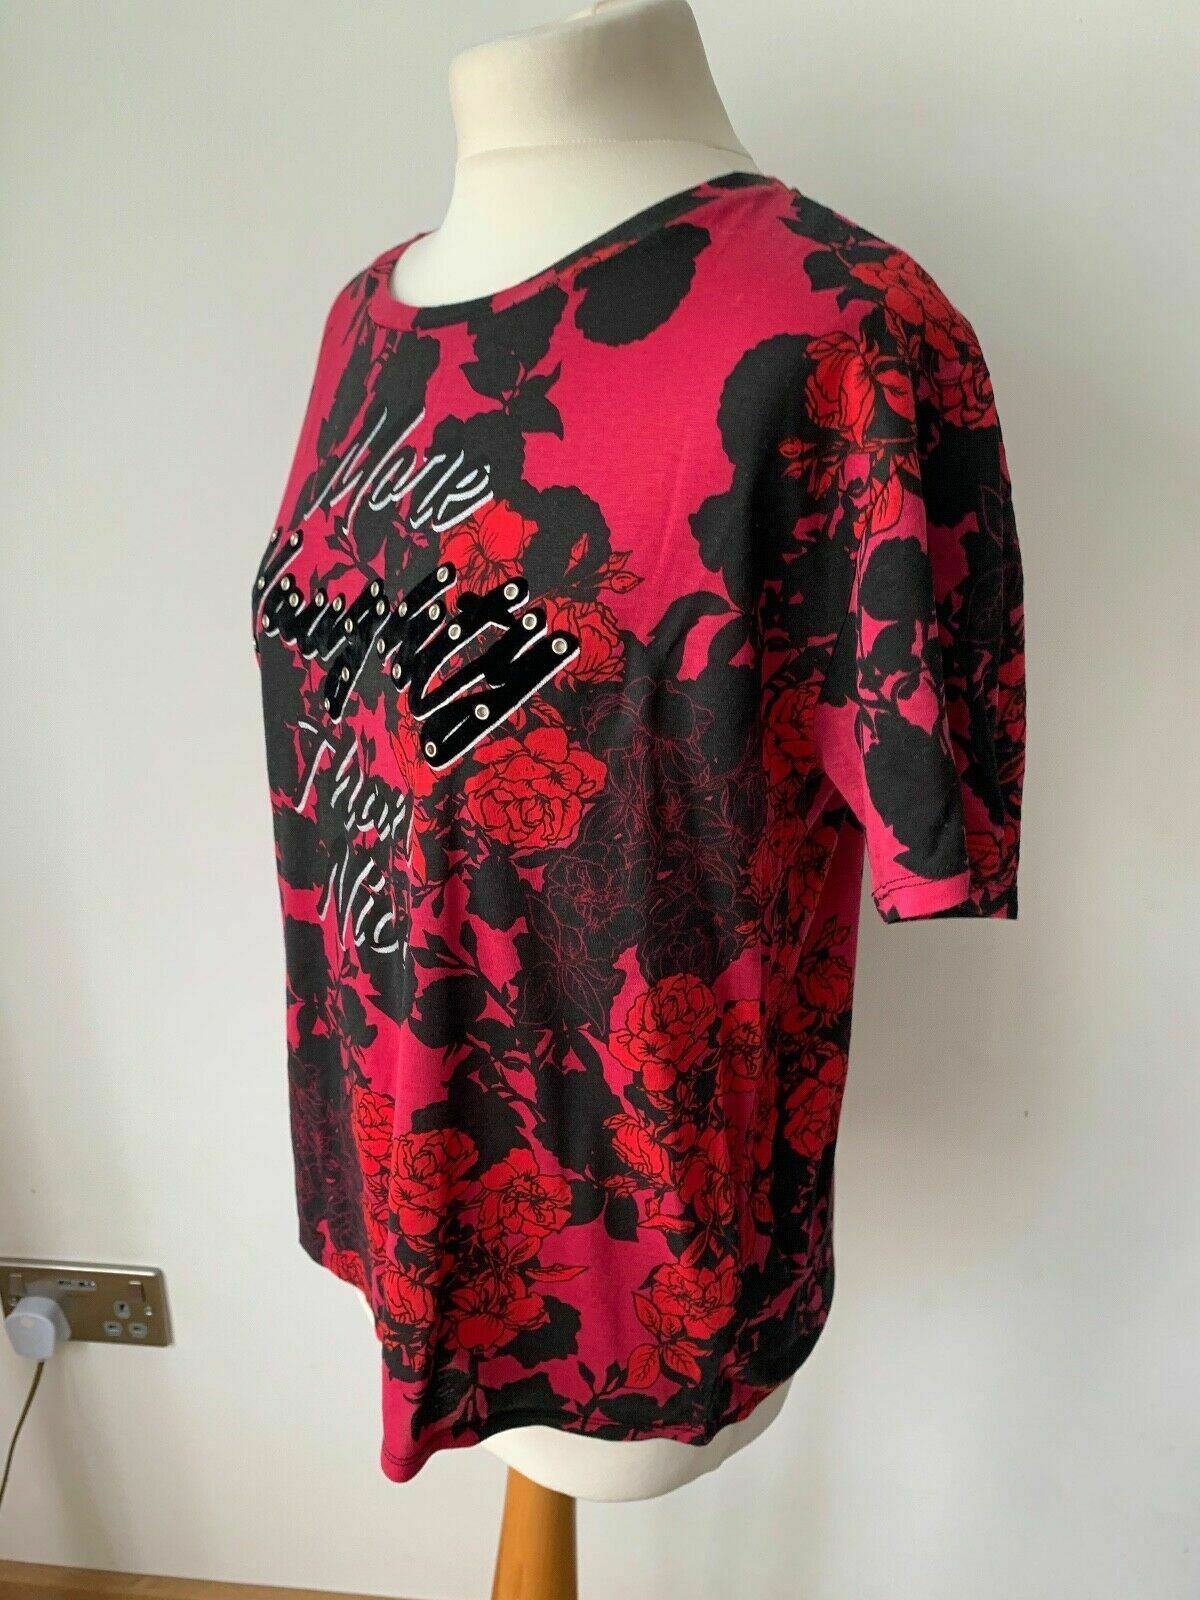 Guess Red Black Roses T-Shirt Slogan Size 8 (M)